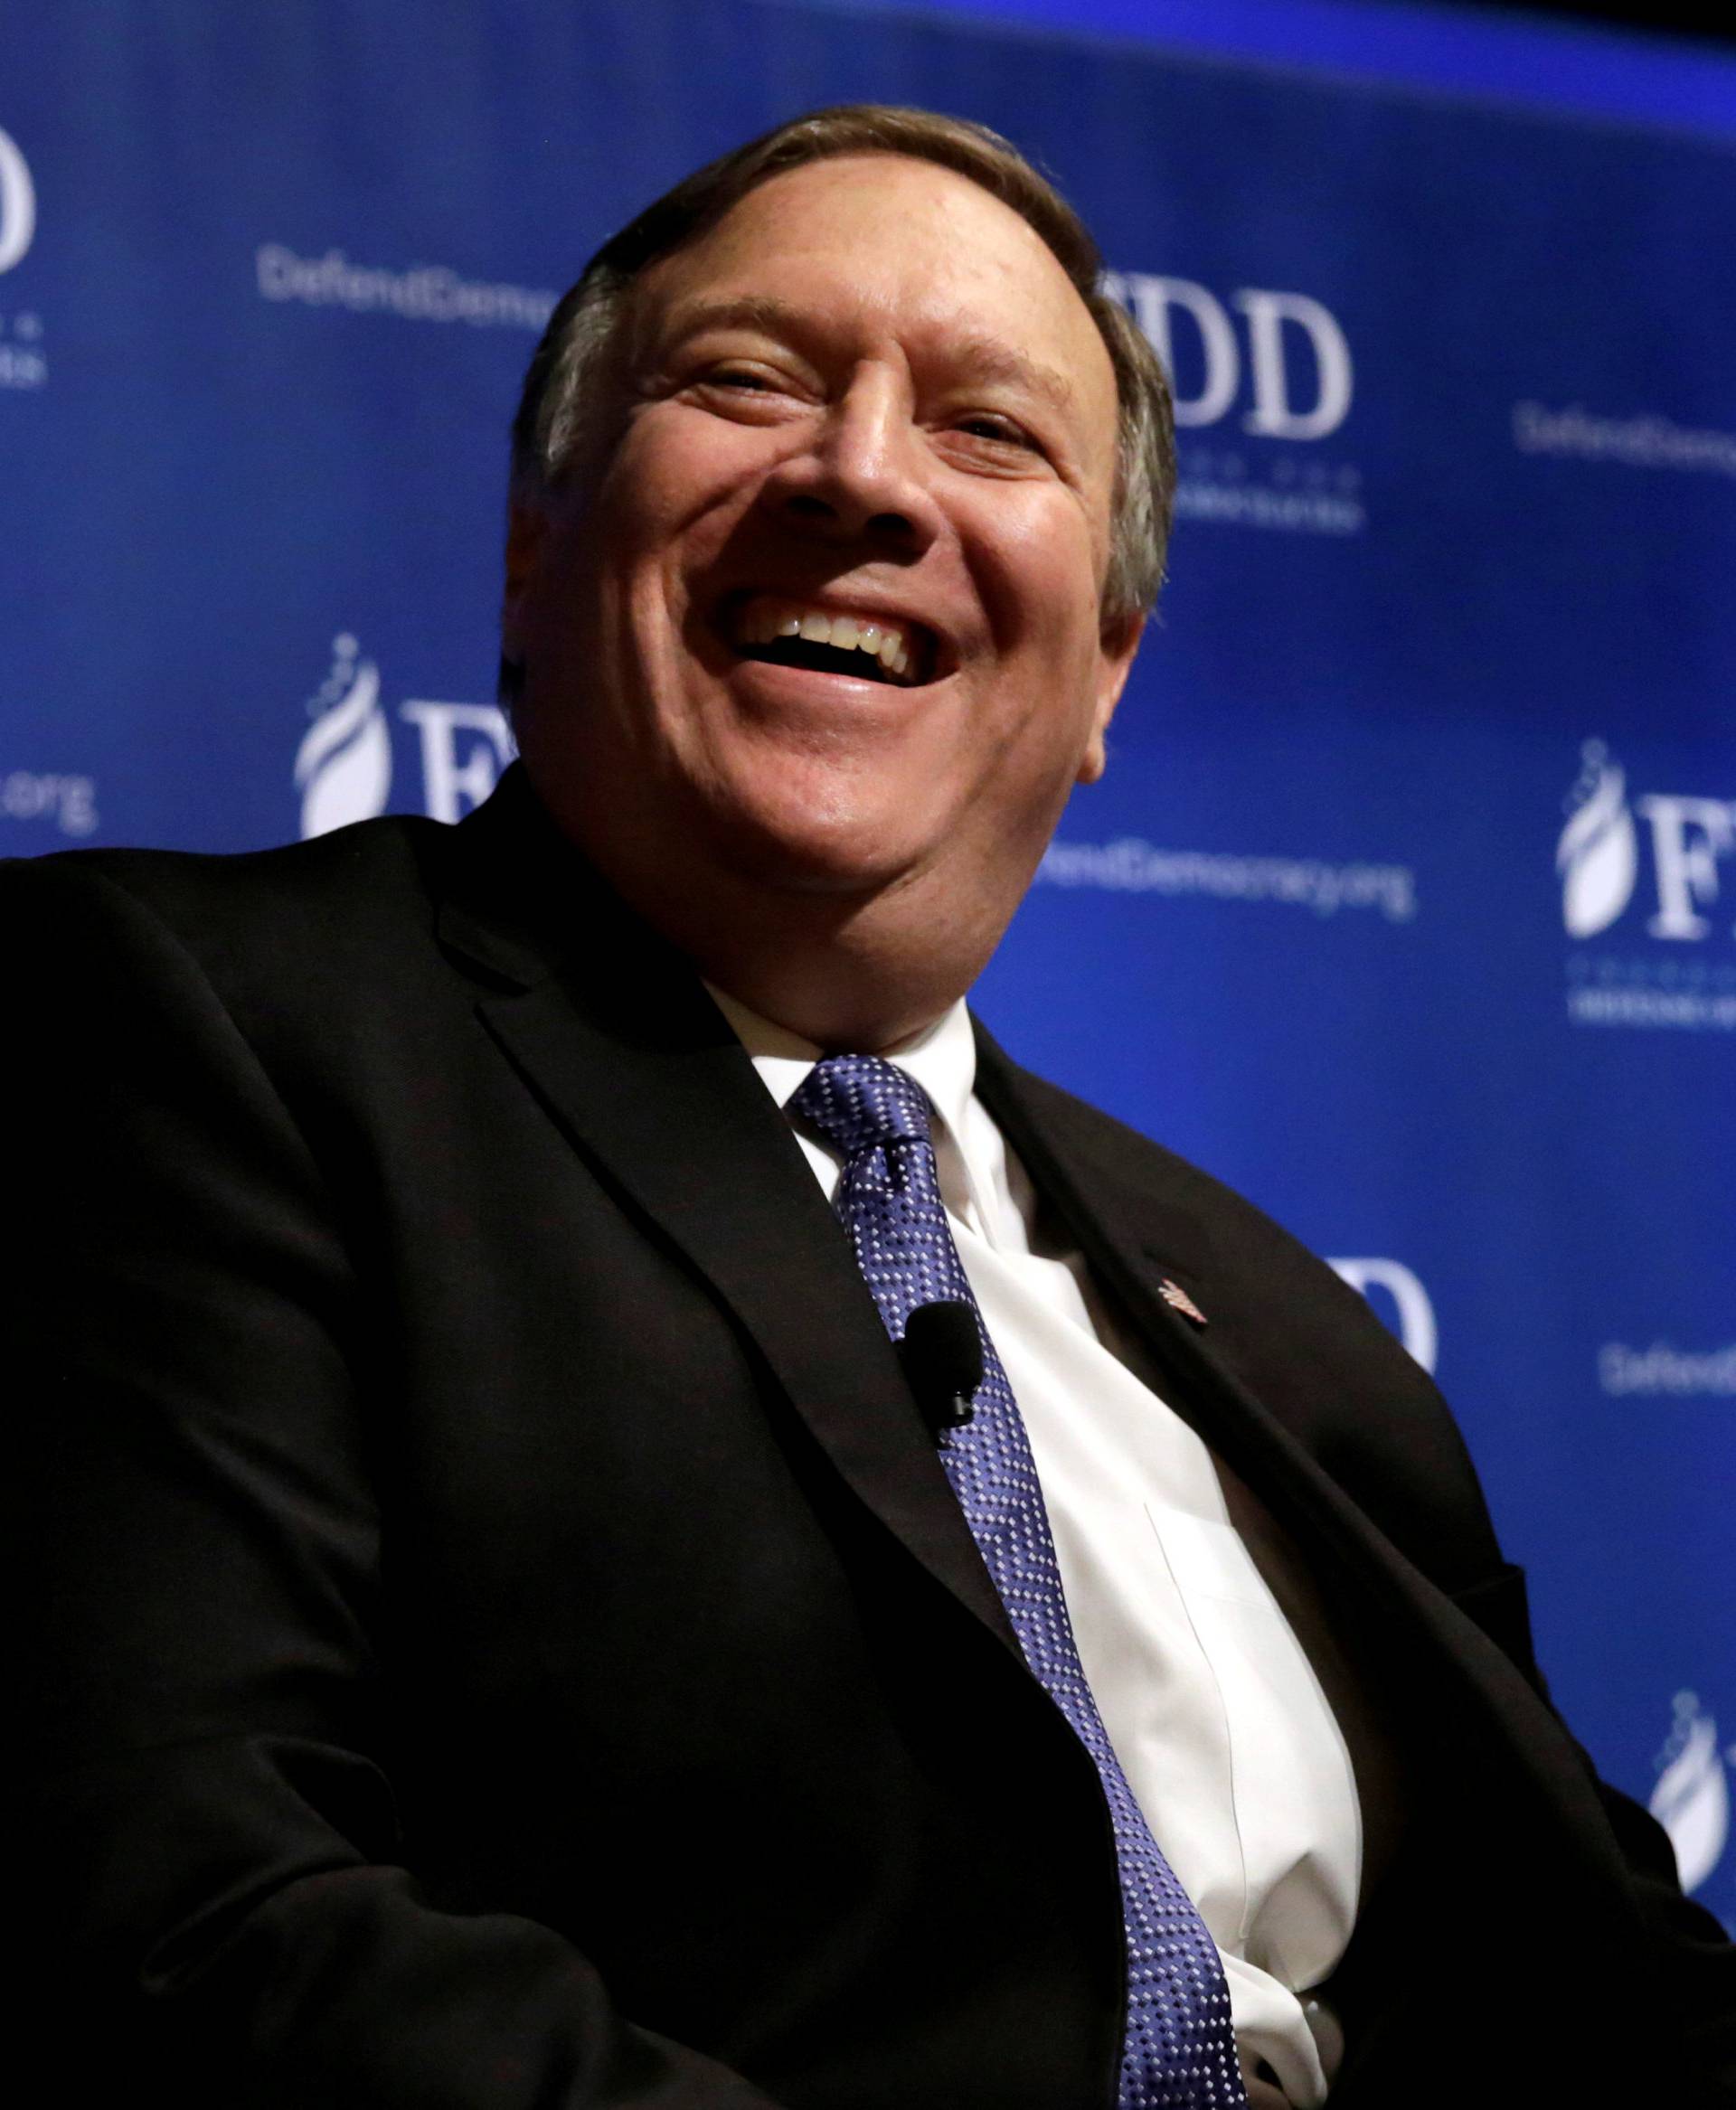 FILE PHOTO: CIA Director Mike Pompeo laughs during the FDD National Security Summit in Washington